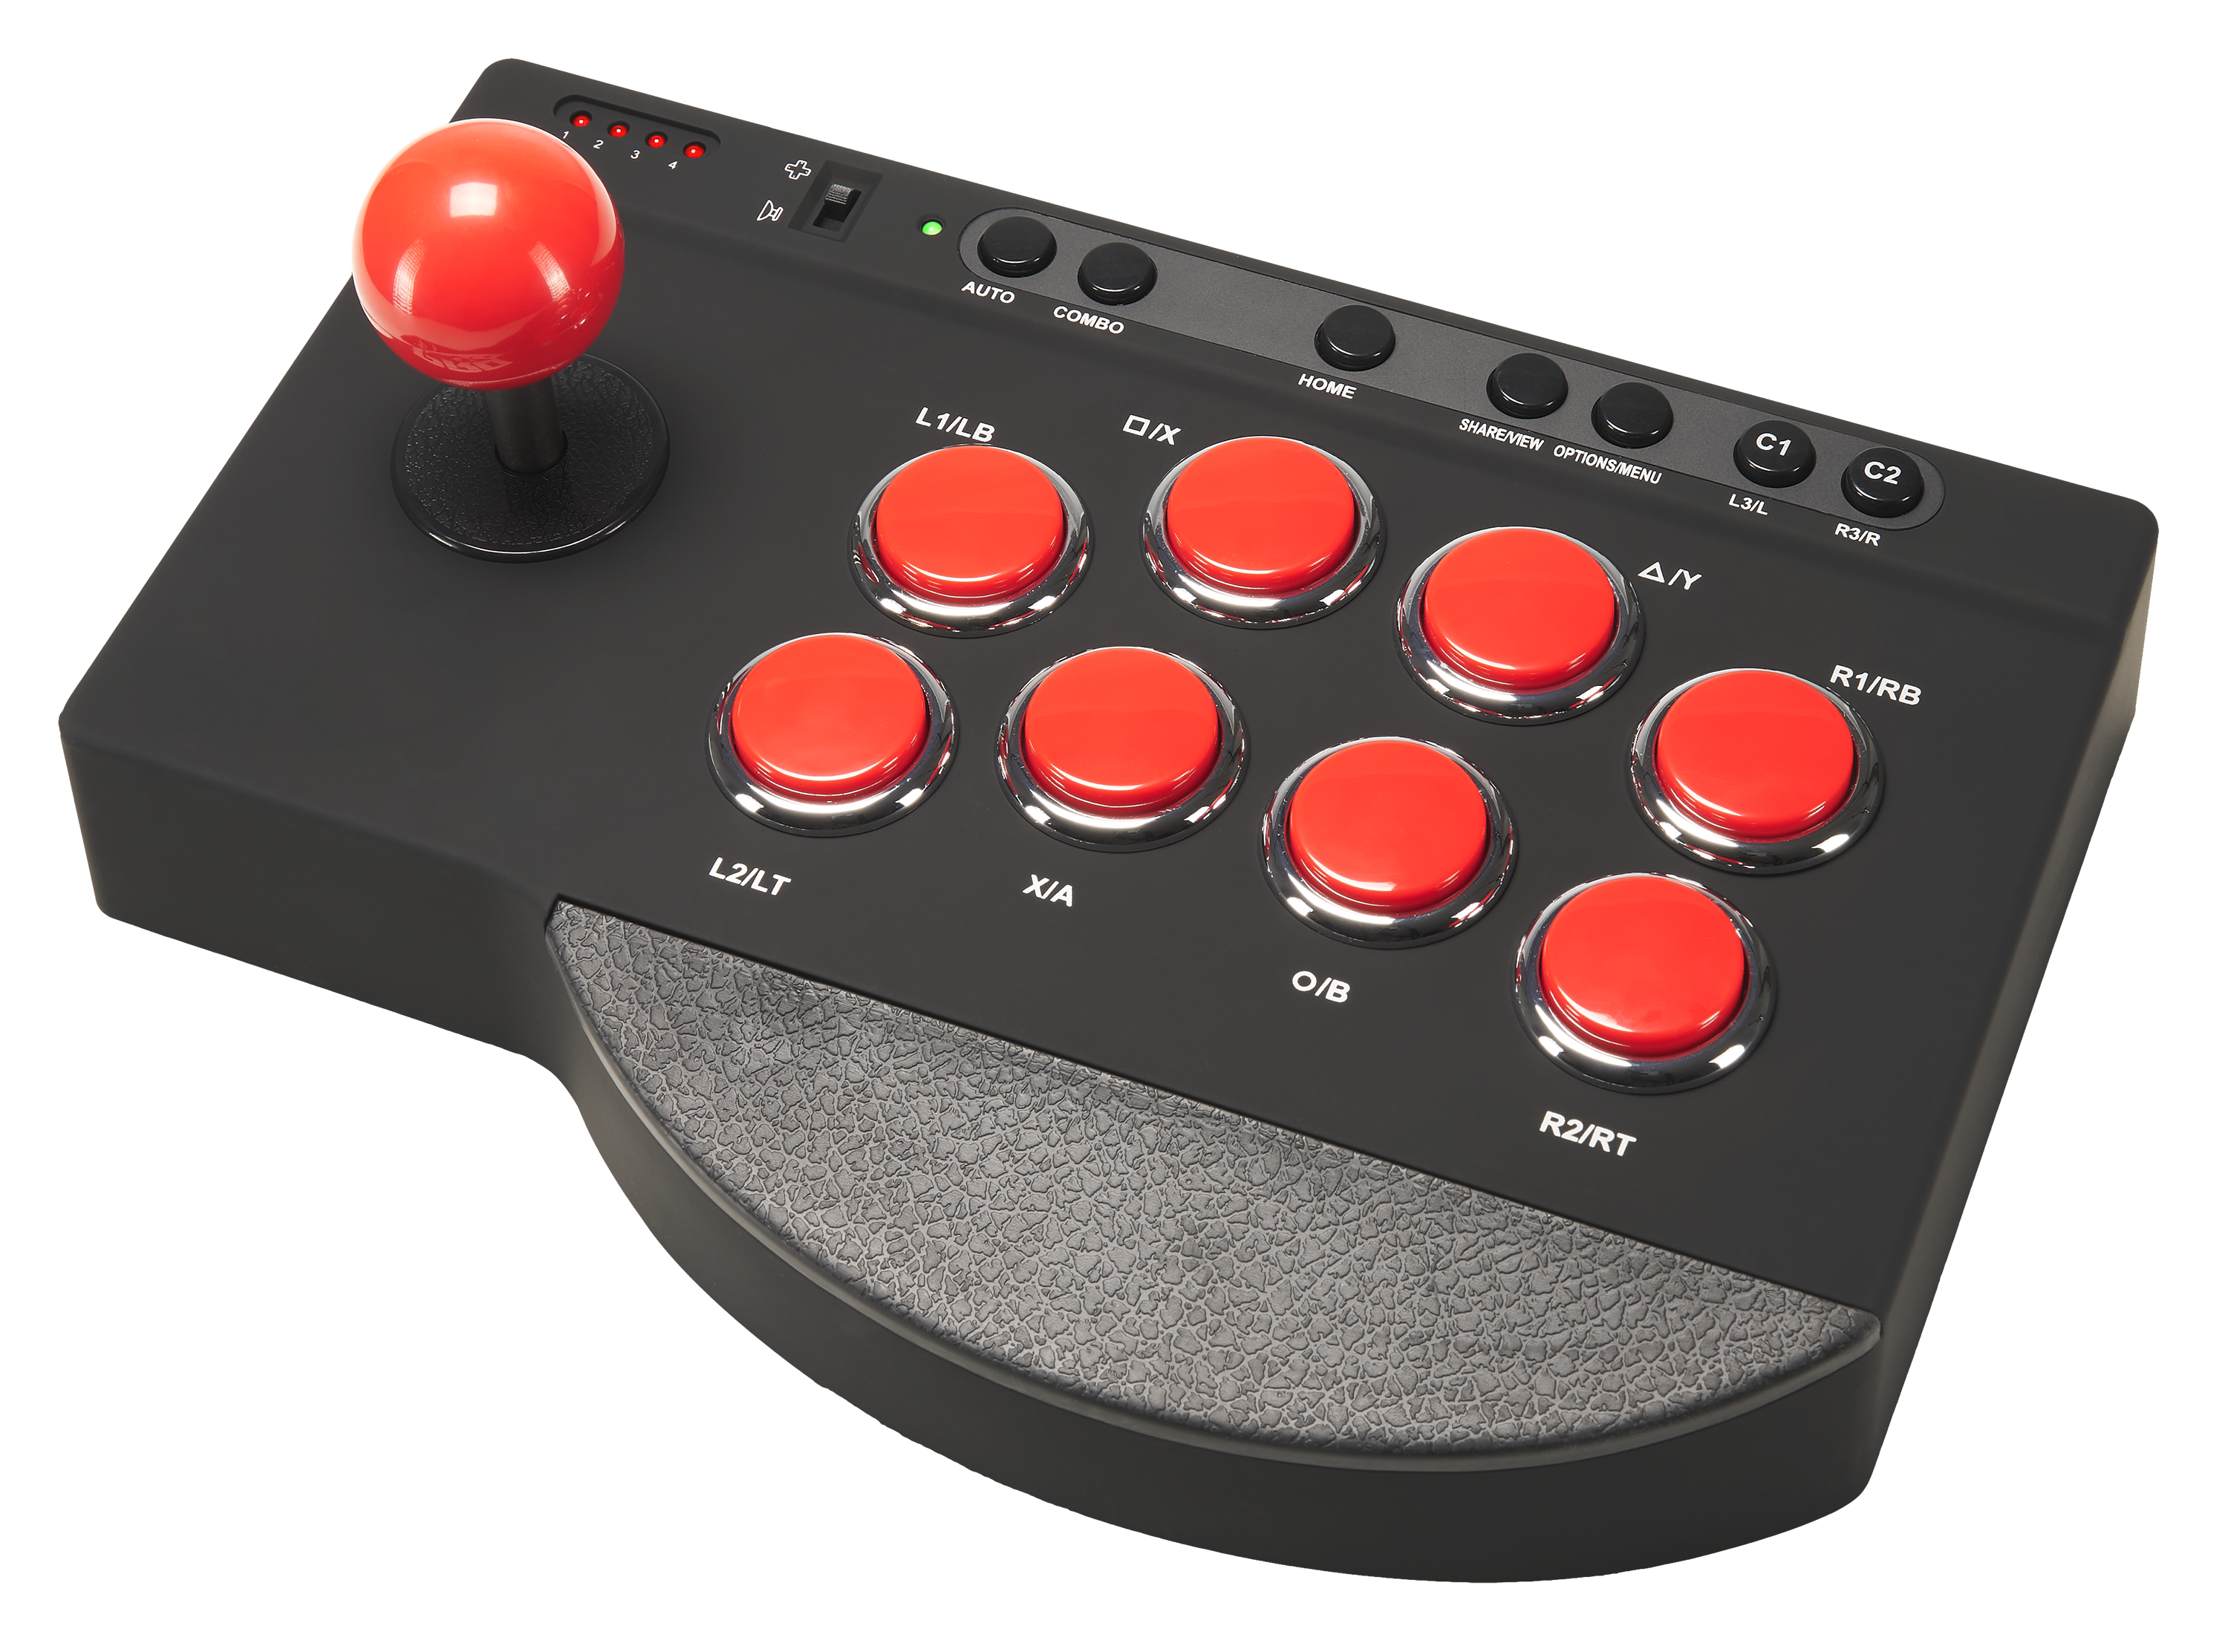 Subsonic Arcade Stick (Ps4 /Ps3 / Xbox / Pc / Switch) - Videospill og konsoller